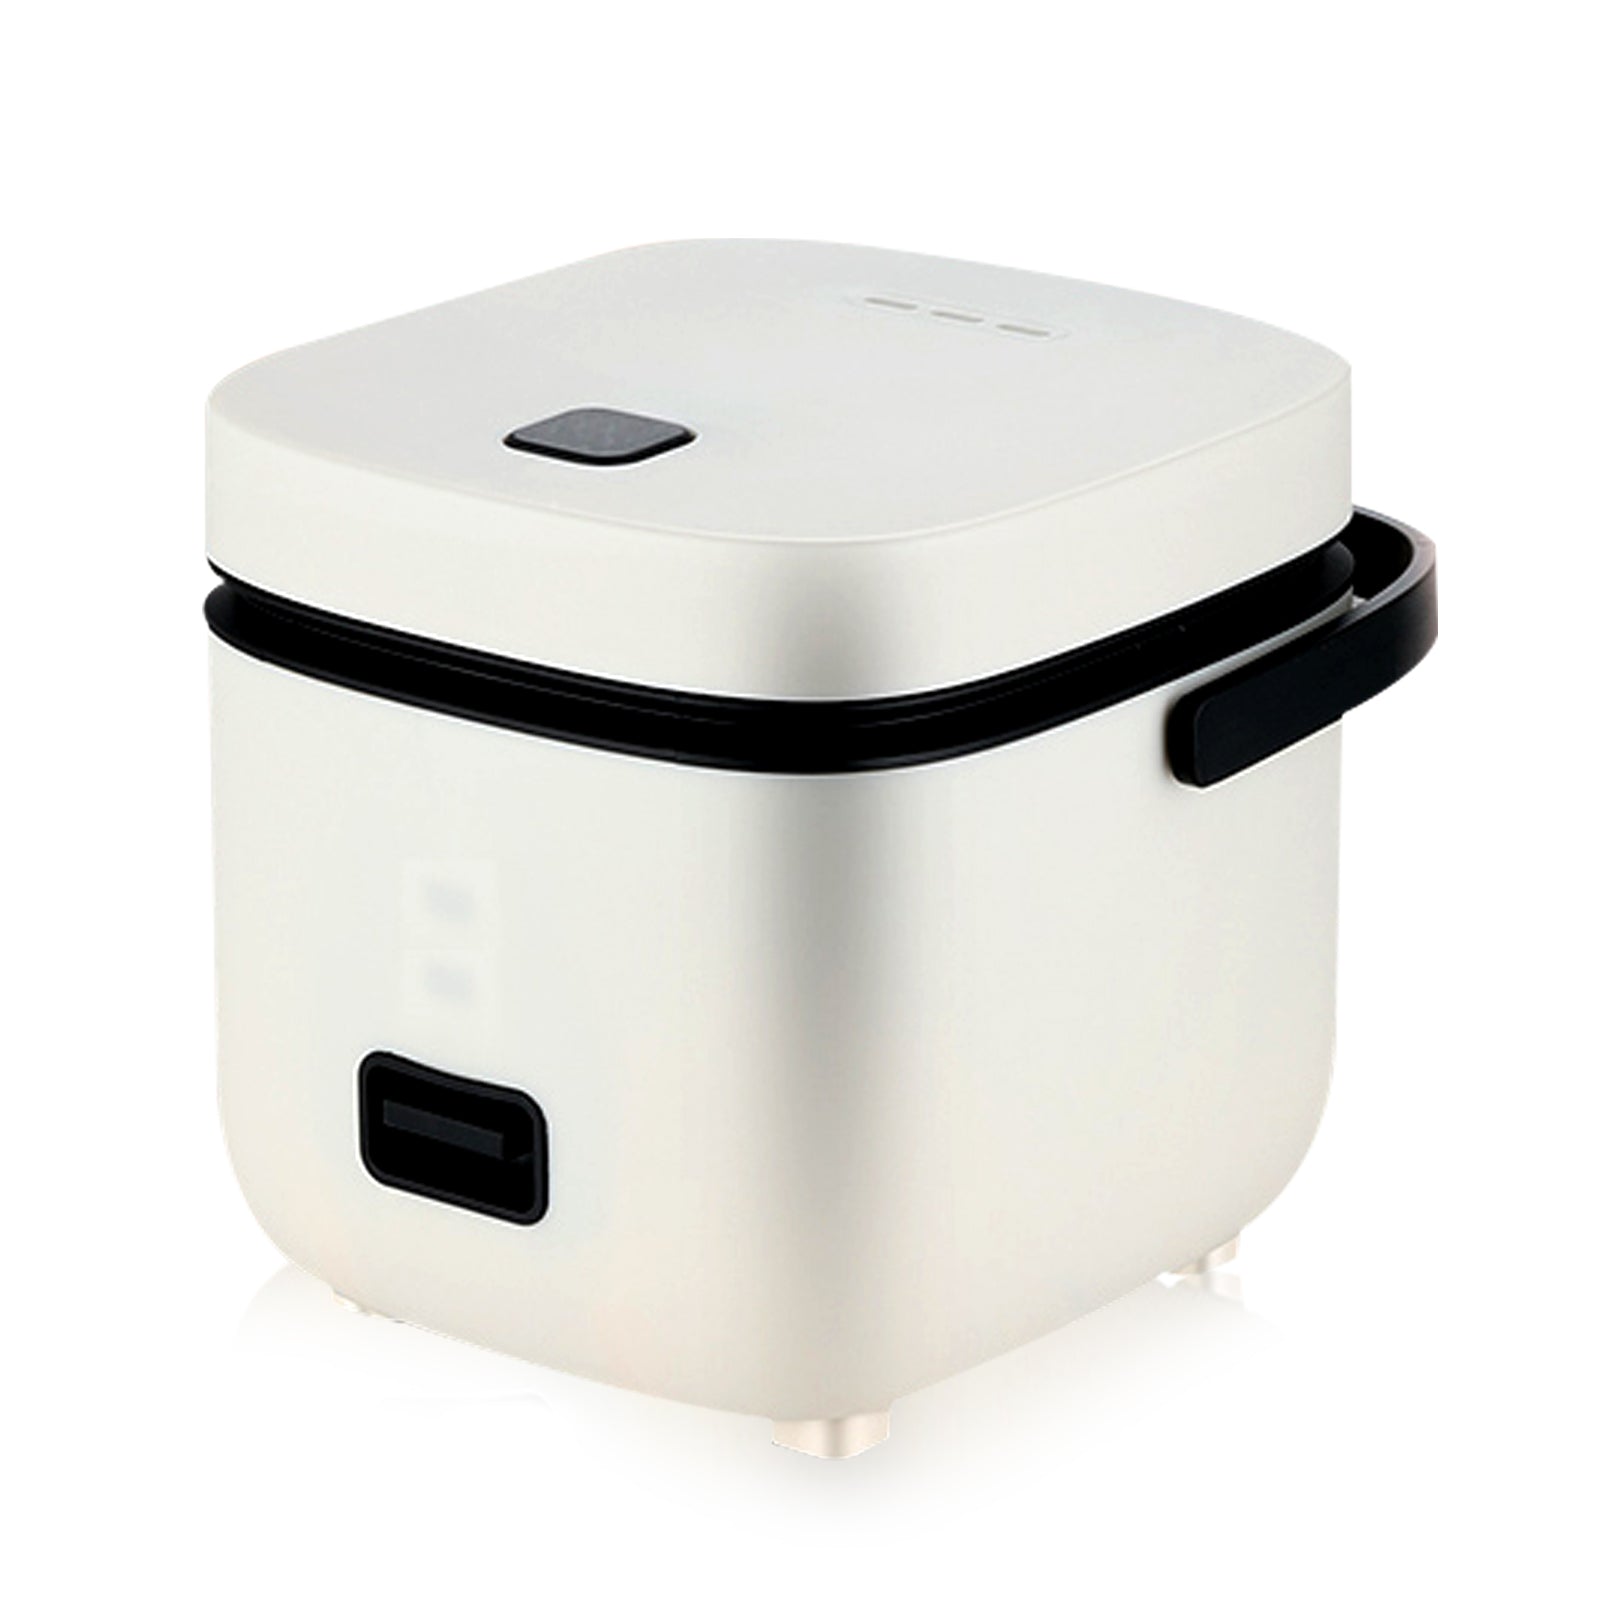 Miniature Real Working Rice Cooker in White